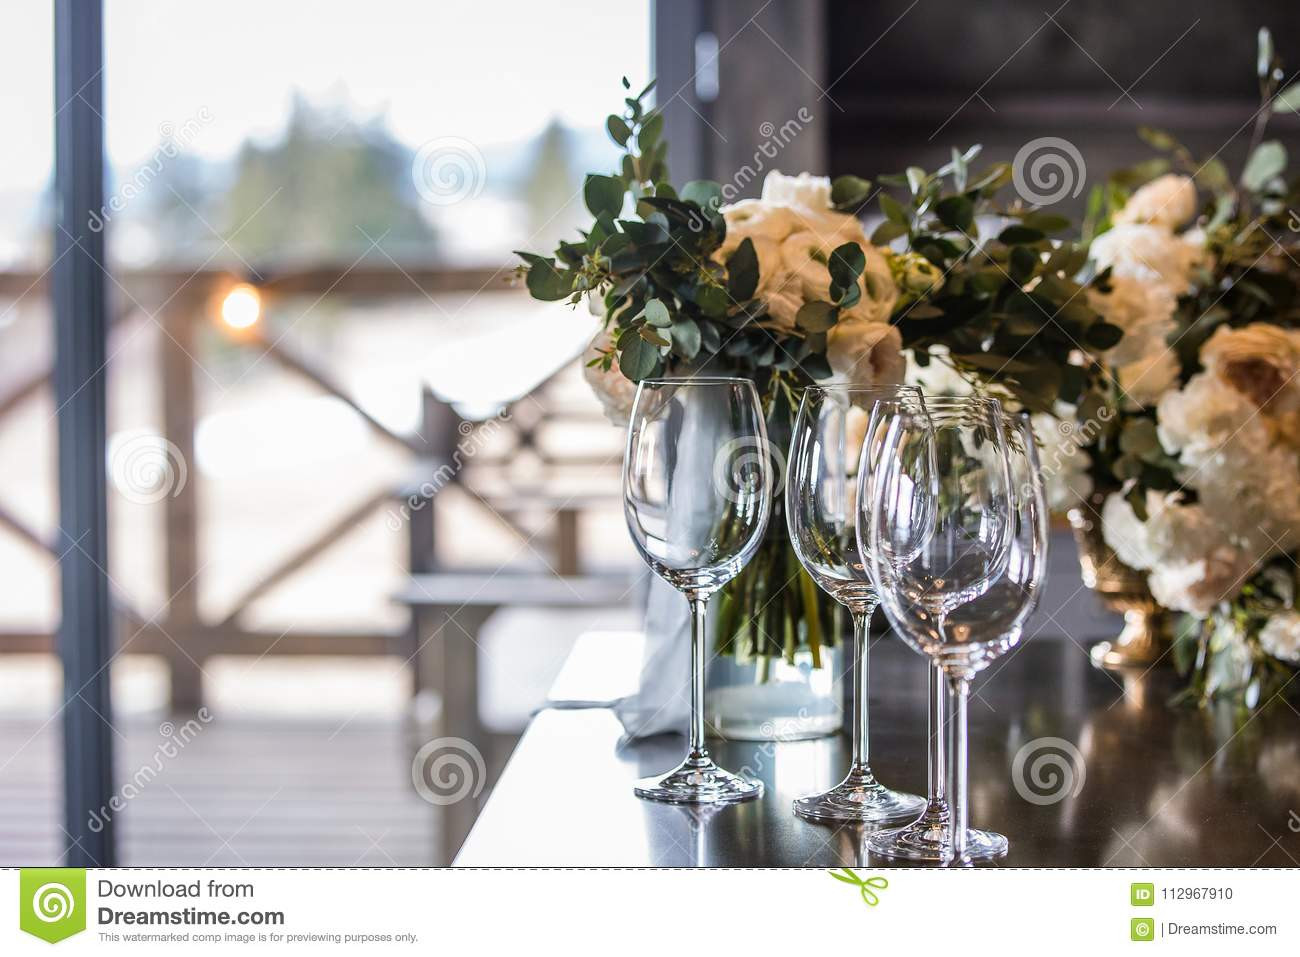 22 Fabulous Wine Glass Vase Flower Arrangement 2022 free download wine glass vase flower arrangement of the brides bouquet lies on a buffet table stock photo image of with regard to the brides bouquet lies on a buffet table